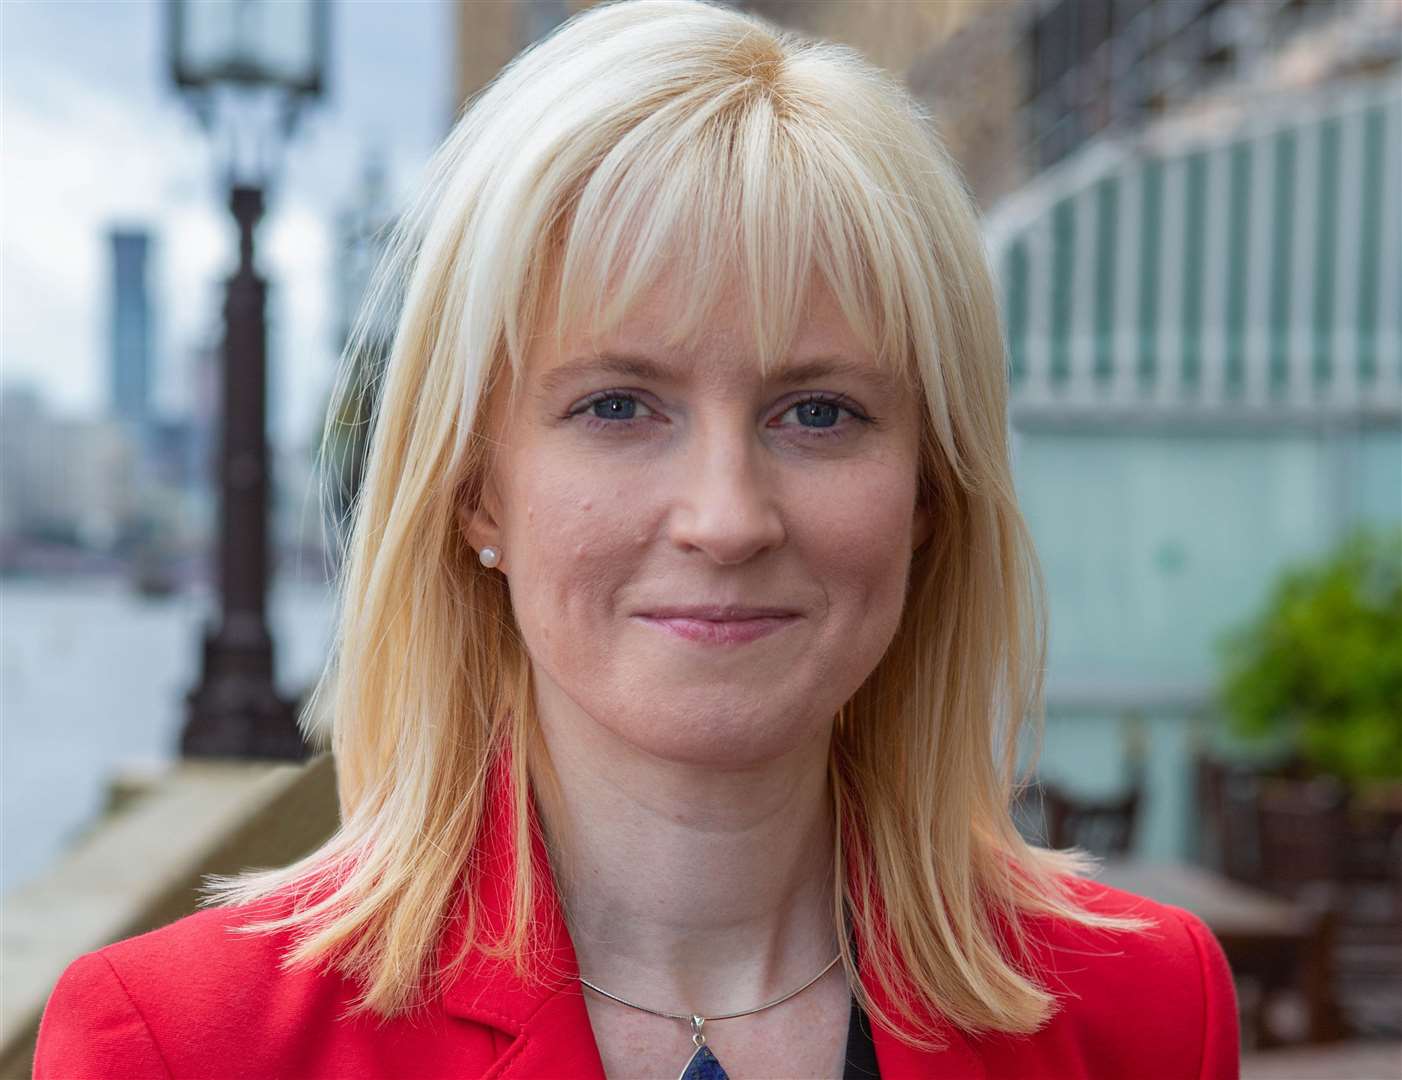 Labour MP Rosie Duffield has said the report is a "shameful chapter" in her party's history